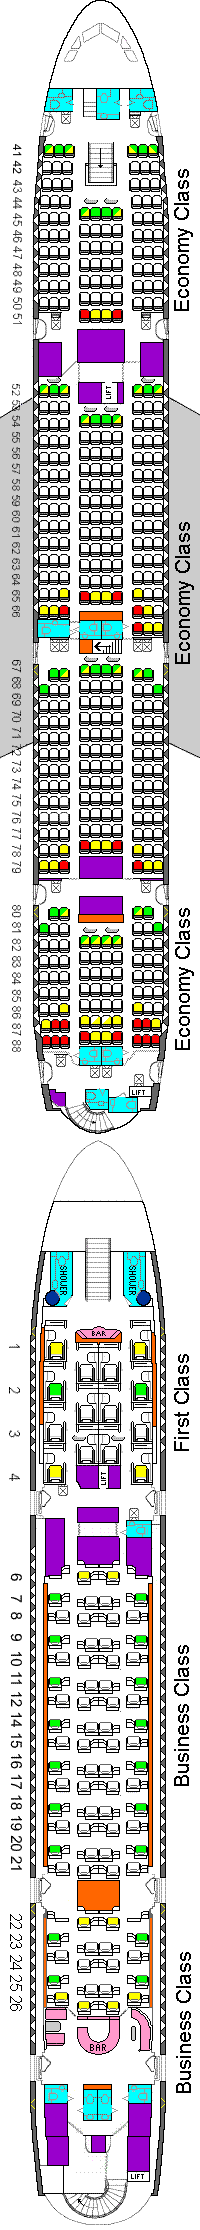 Airbus A380 Seating Economy